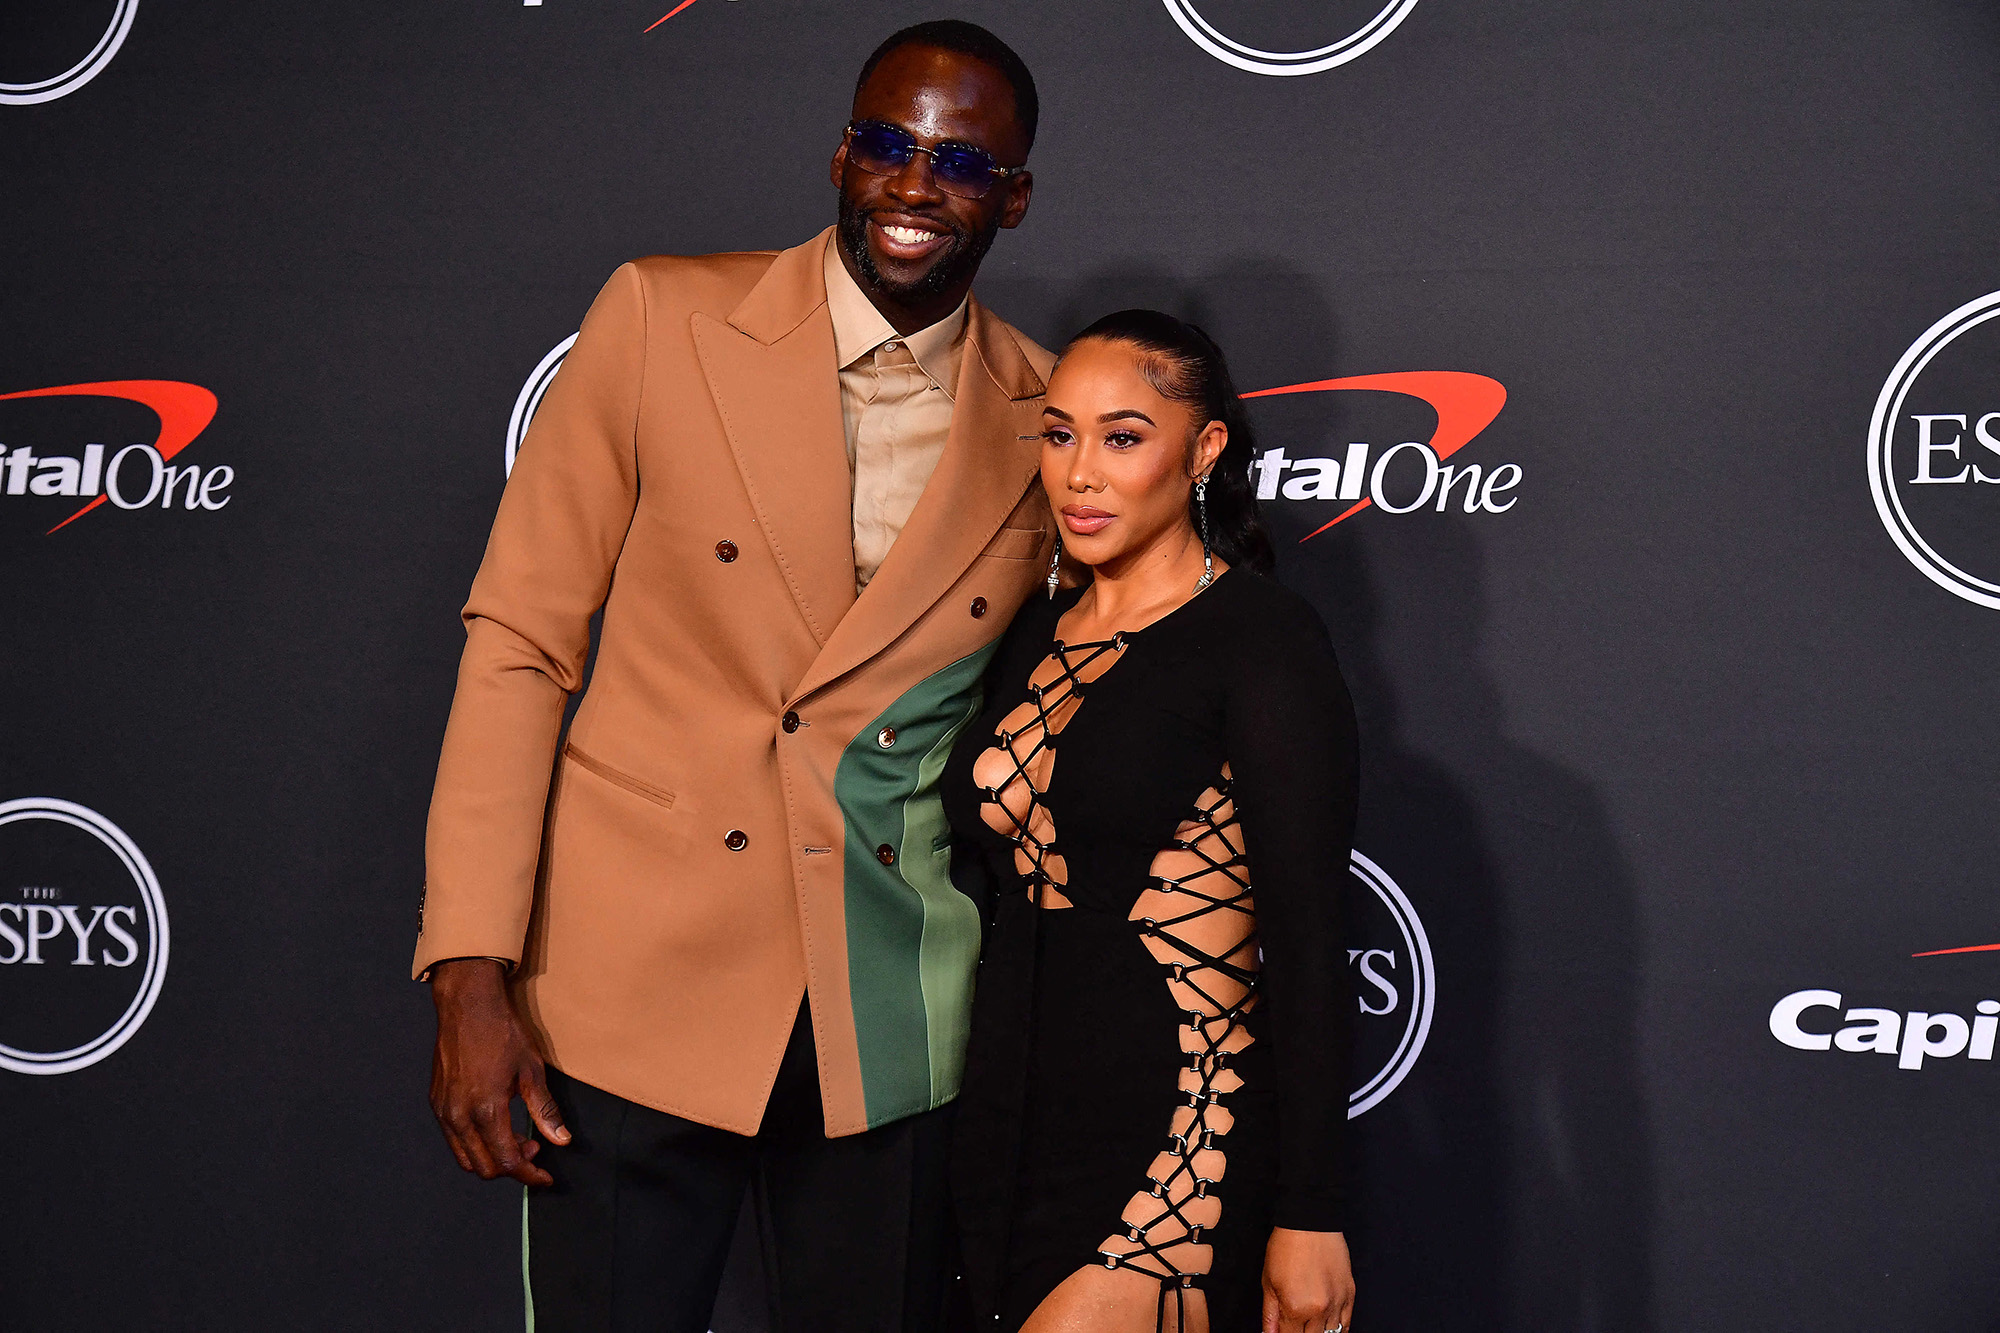 Inspiredlovers USA-SPORT_-8-2 Draymond Green’s Millionaire Wife Once Had an Unearthed Relationship With Ex-76ers Star That Even Resulted in 1 Out of Their 4 Children Today NBA Sports  Warriors Stephen Curry NBA News Draymond Green 